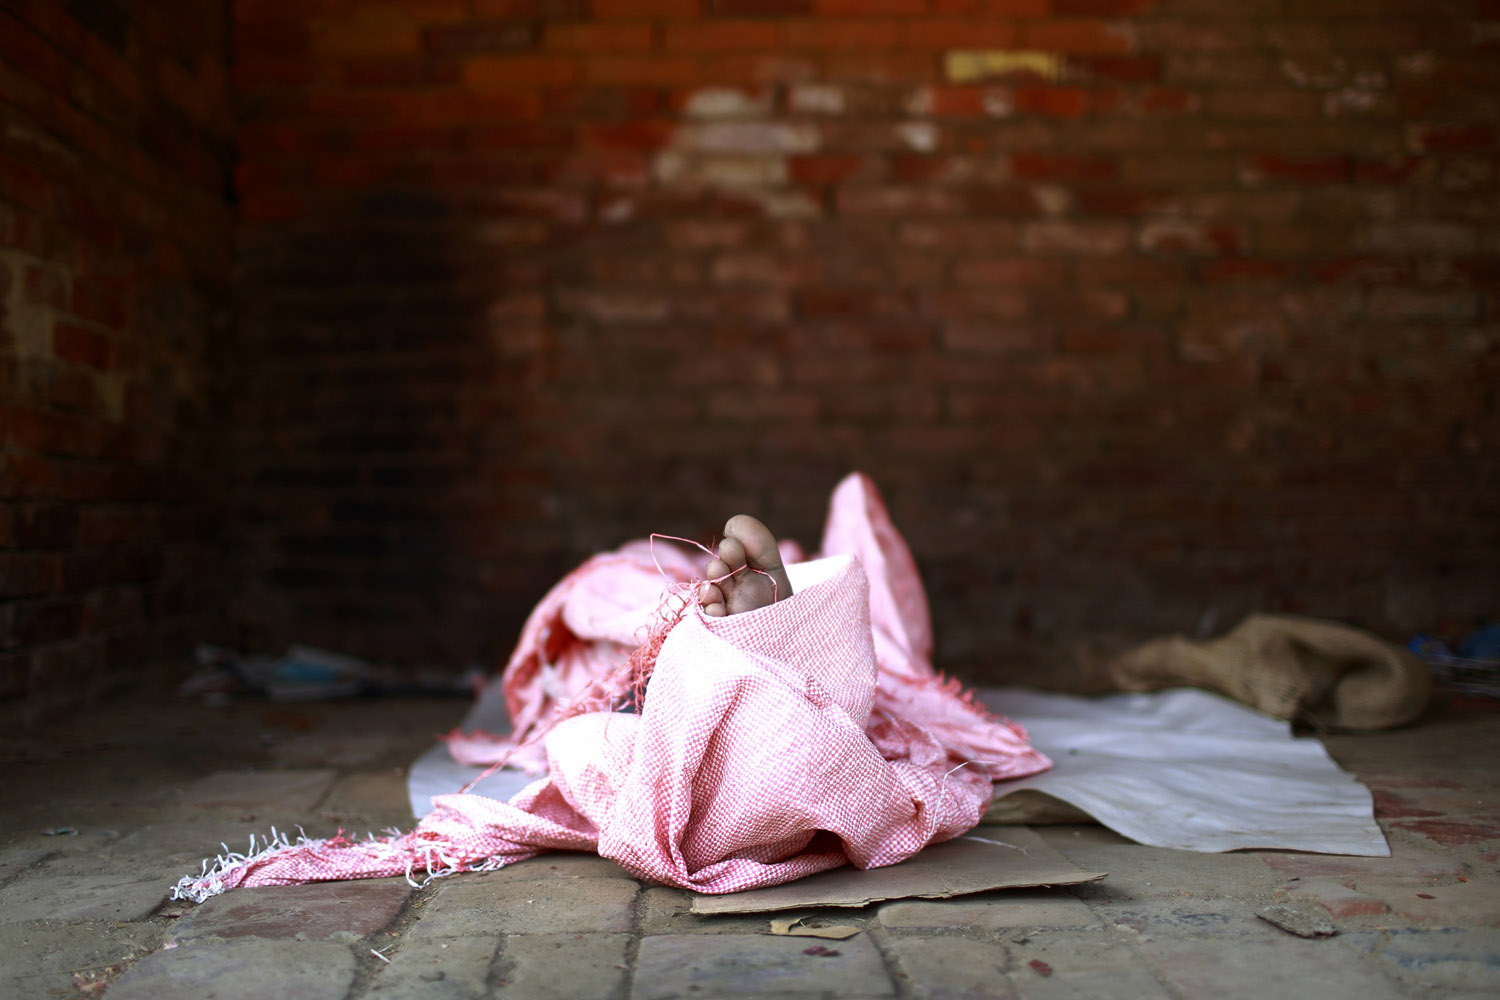 Toe of a street child pokes out from a sack as he sleeps along the streets of Lalitpur